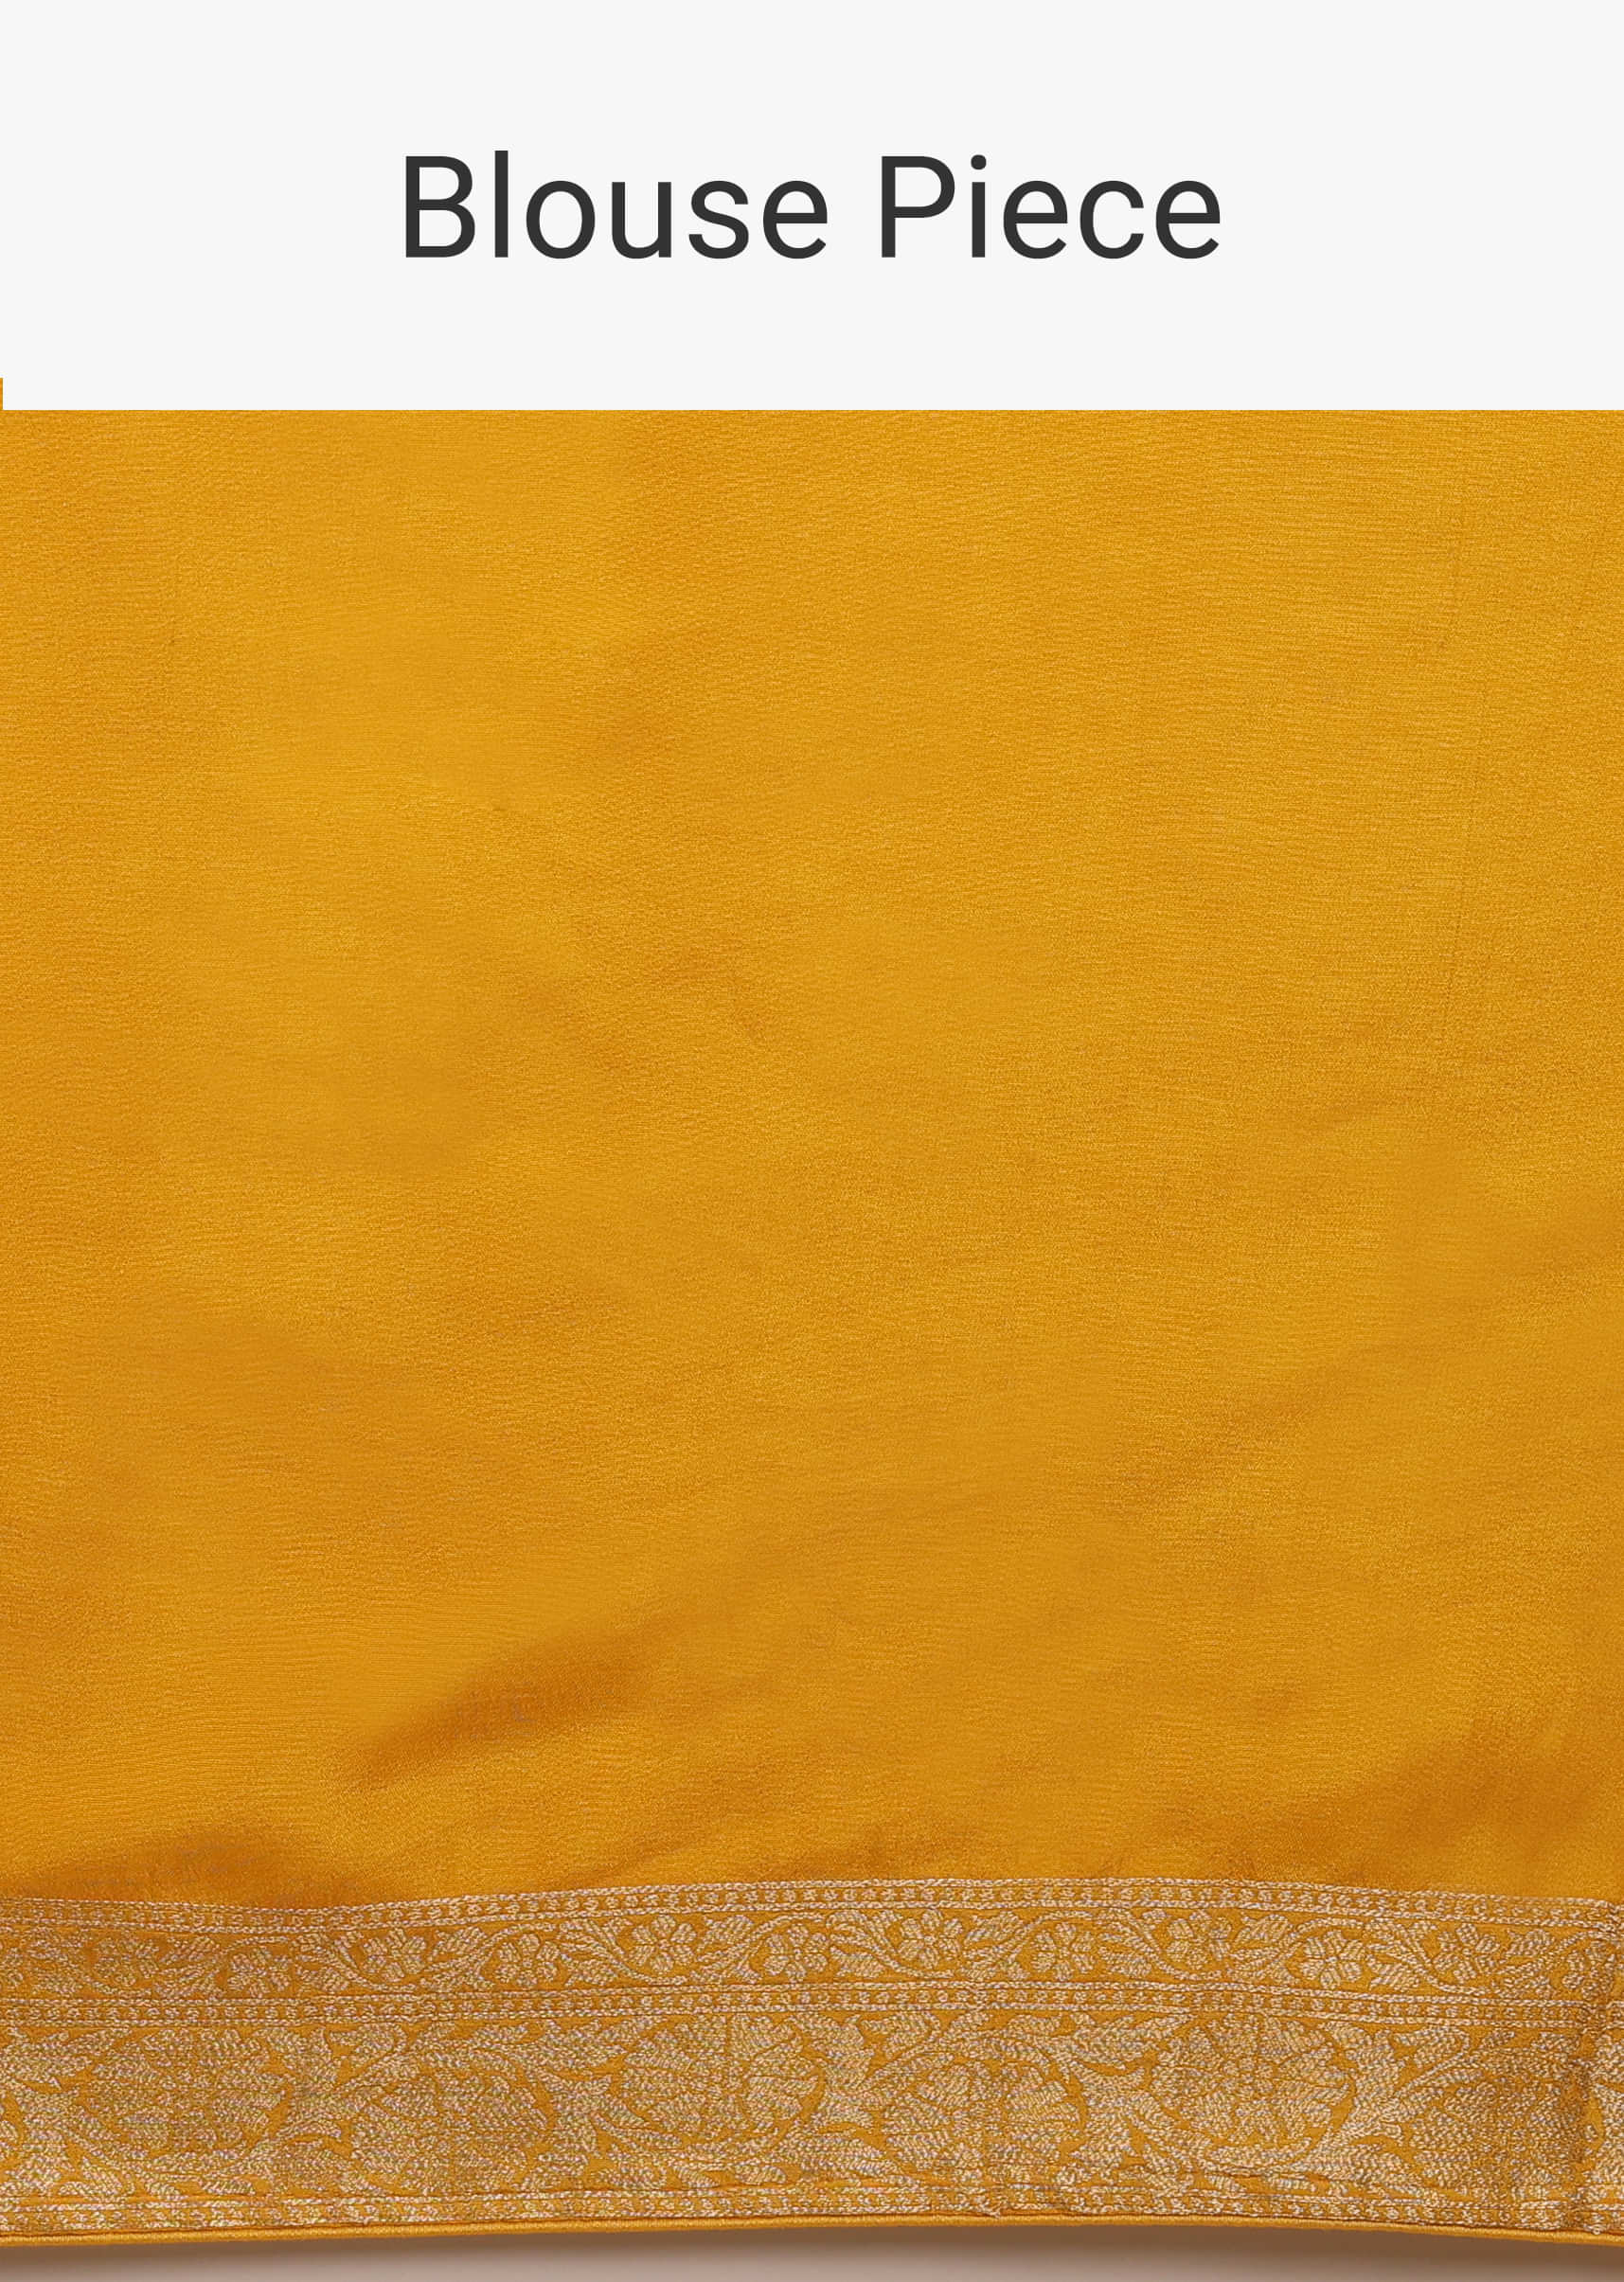 Marigold Yellow Saree In Dola Silk With Woven Buttis And Floral Pallu Weave